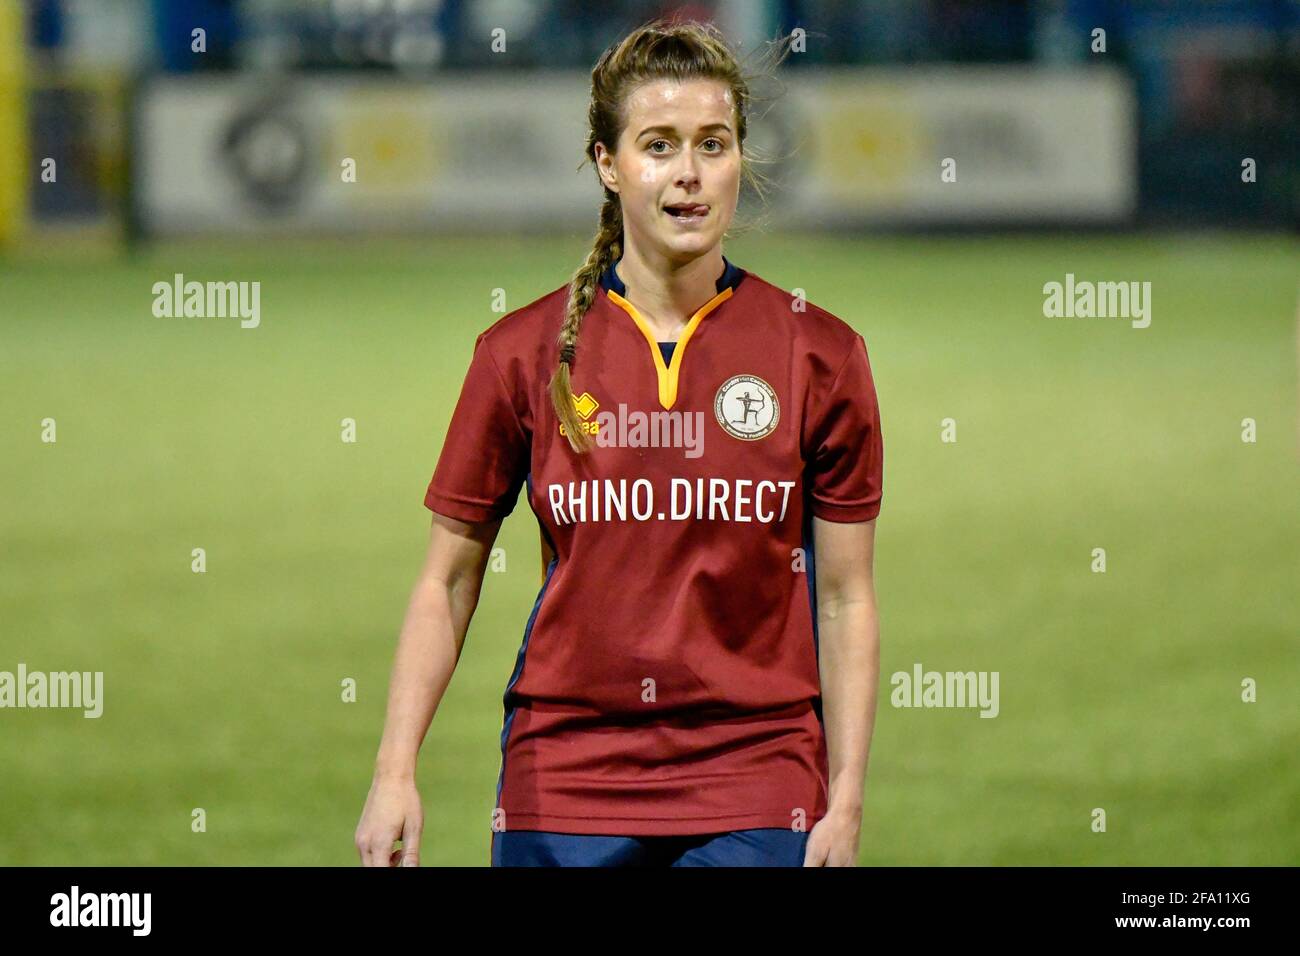 Cardiff, Wales. 21 April, 2021. Chloe O'Connor of Cardiff Met Women during the Welsh Premier Women's League match between Cardiff Met Women and Swansea City Ladies at the Cyncoed Campus in Cardiff, Wales, UK on 21, April 2021. Credit: Duncan Thomas/Majestic Media/Alamy Live News. Stock Photo